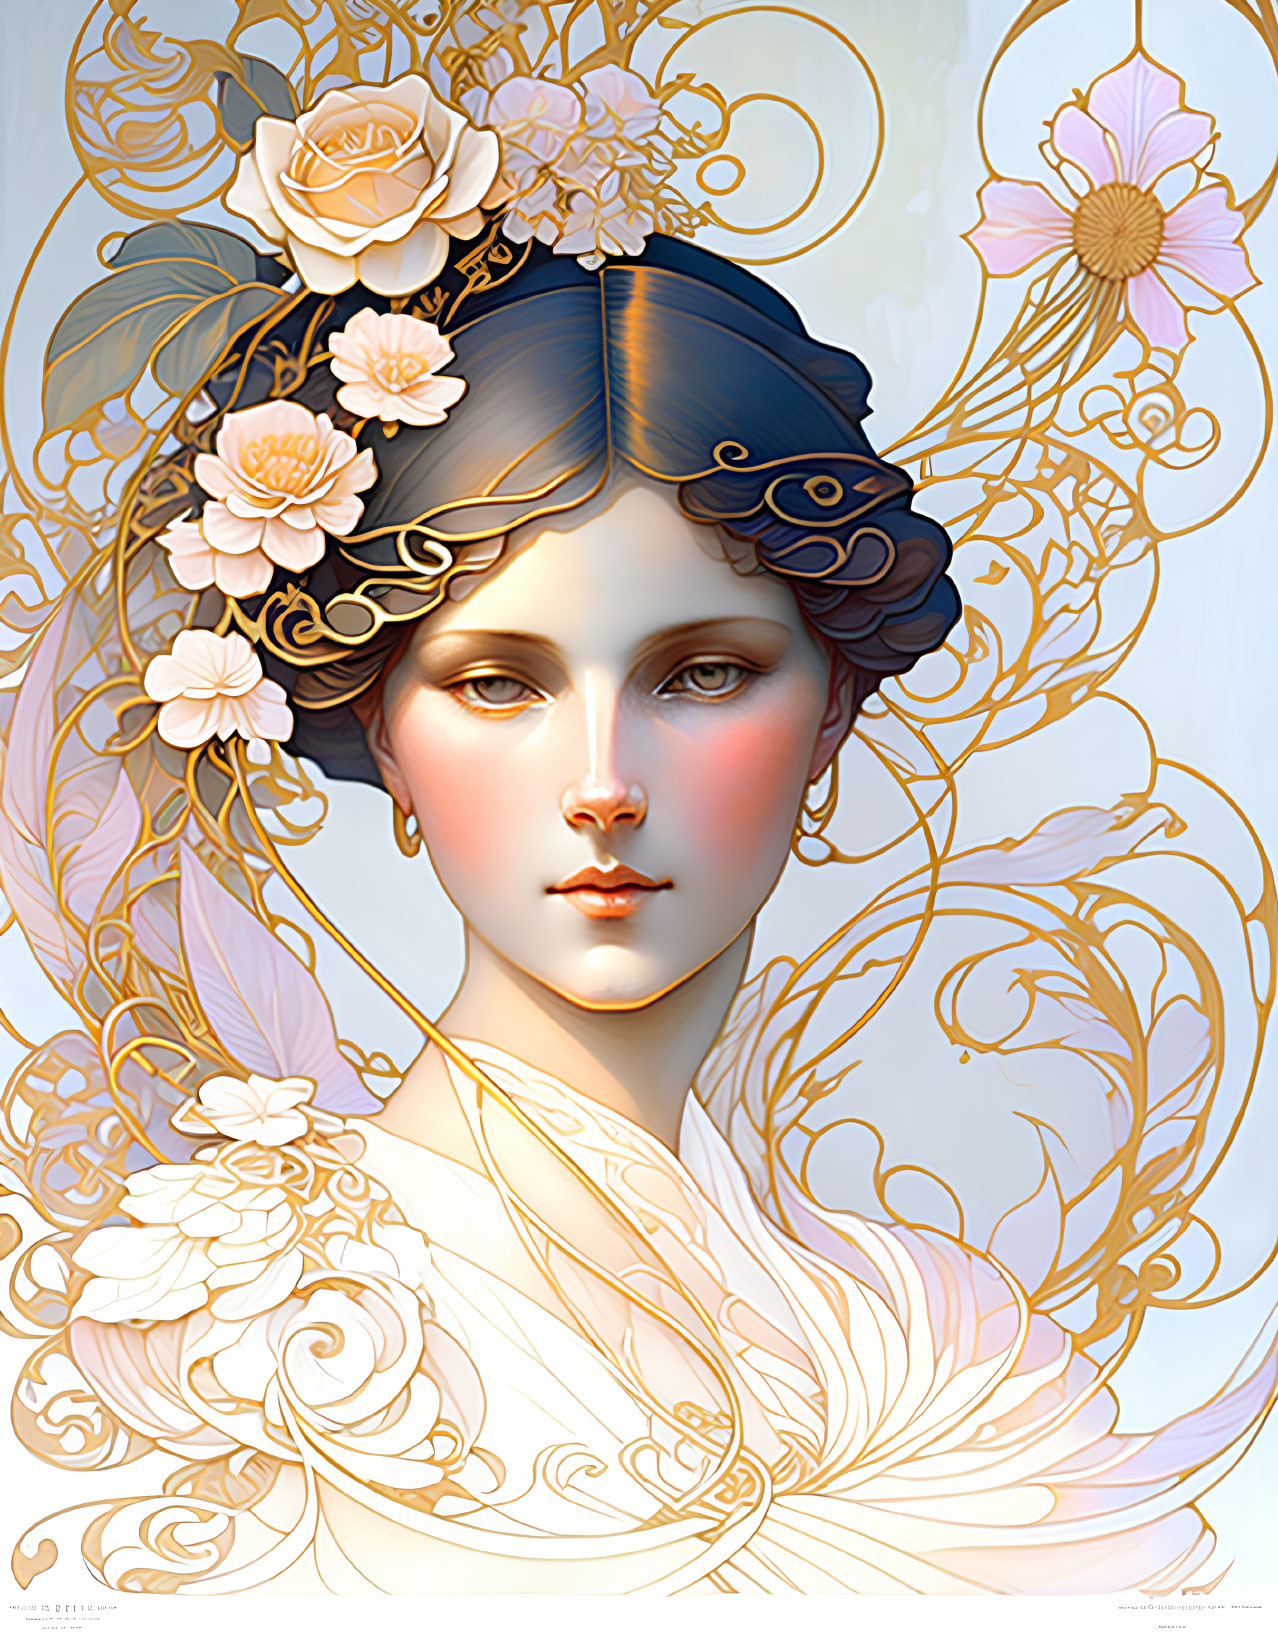 Illustrated portrait of woman with pale features and golden floral patterns.